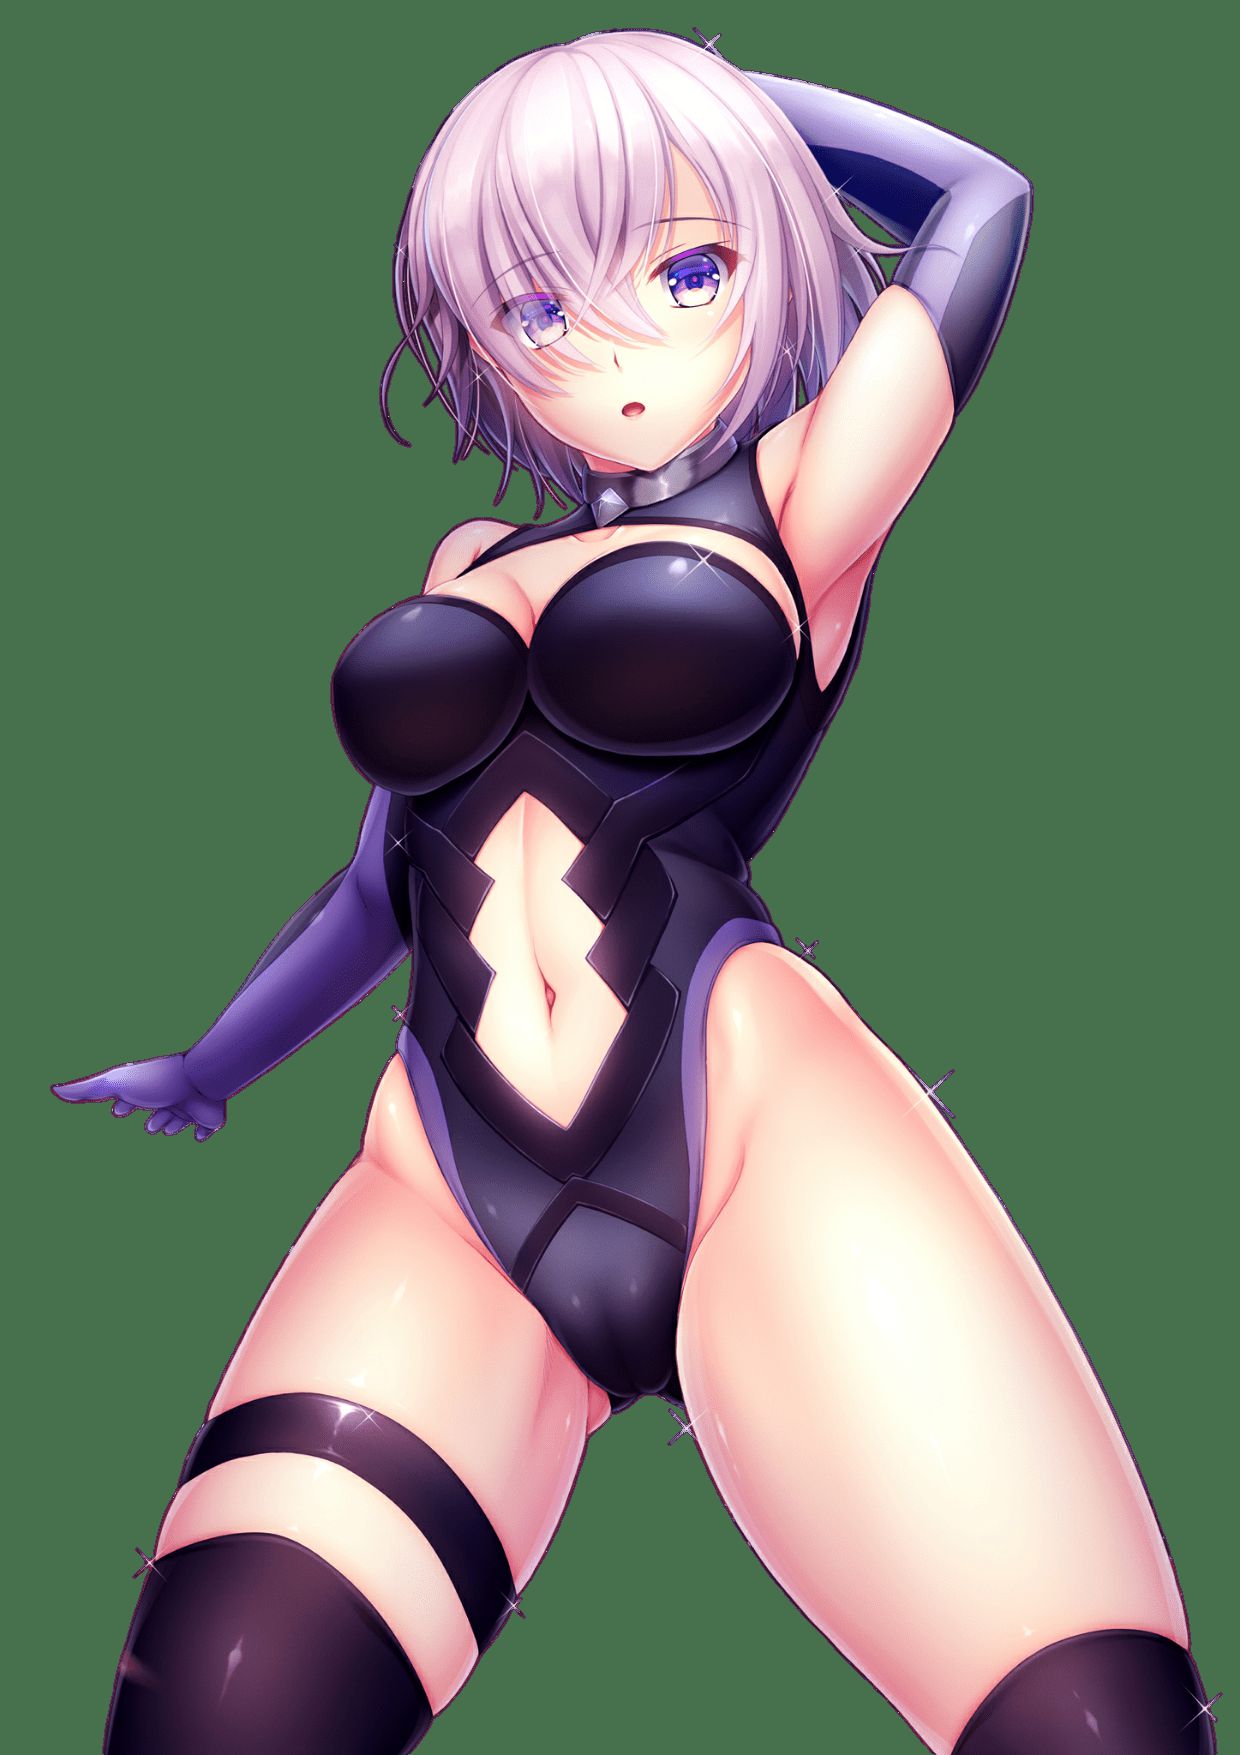 【Erocora Character Material】PNG background transparent erotic image such as anime characters Part 421 36